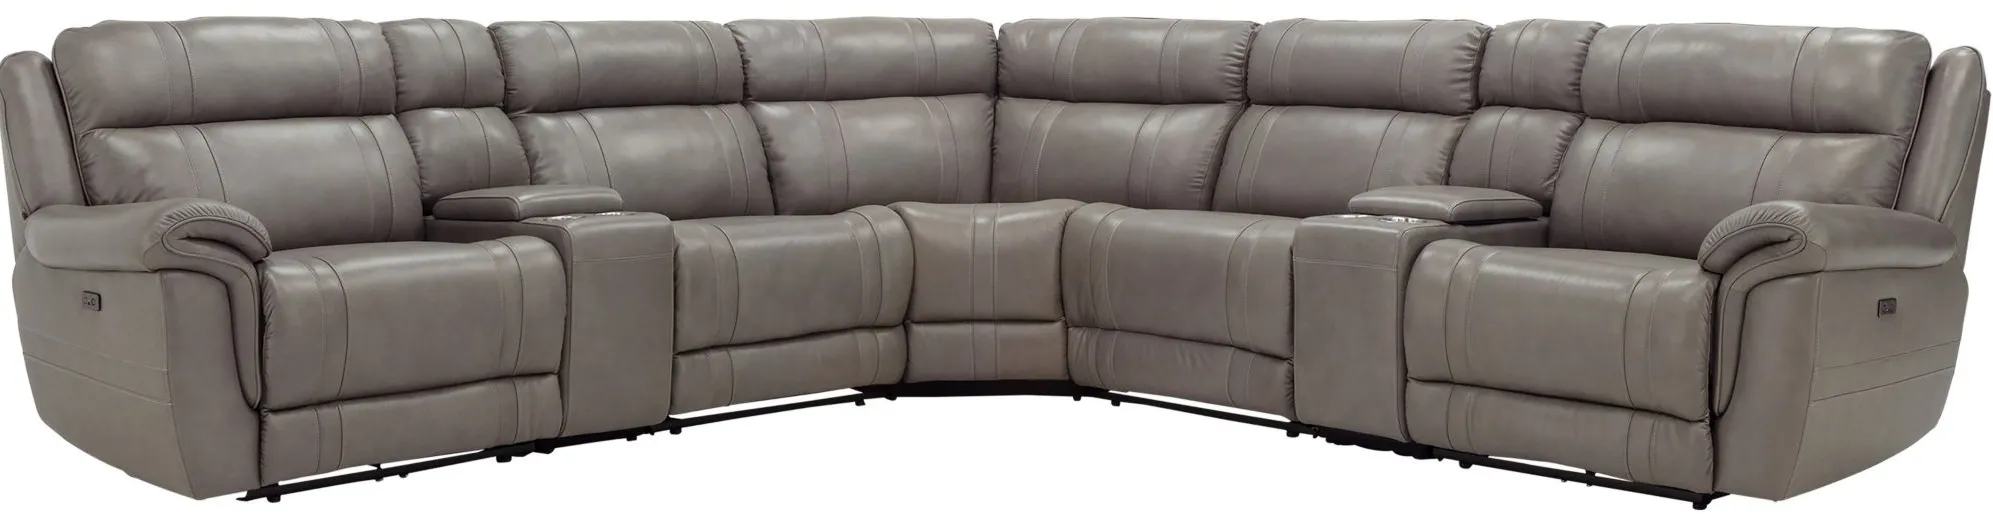 Ridgewood 7-pc. Leather Power-Reclining Sectional Sofa in Gray by Bellanest